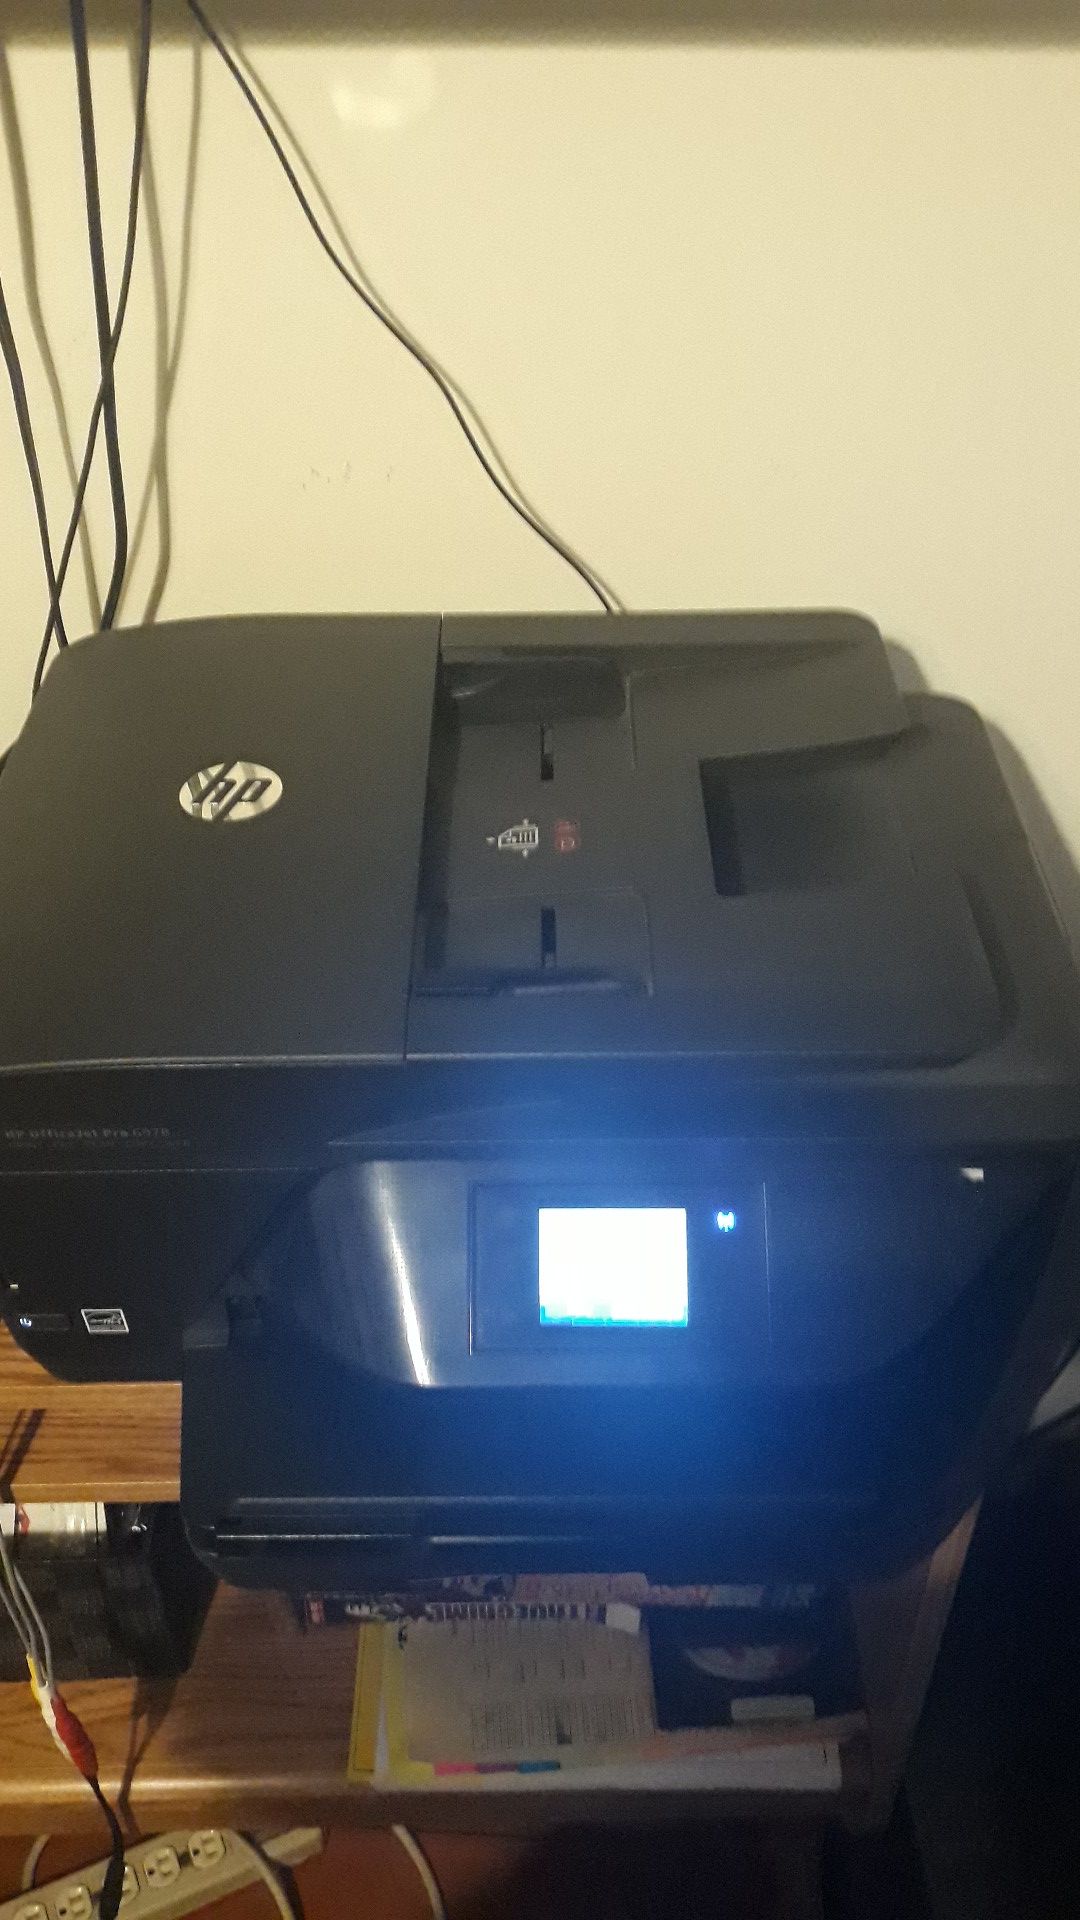 HP Office Jet Pro 6978 series (Serious Buyers Only)